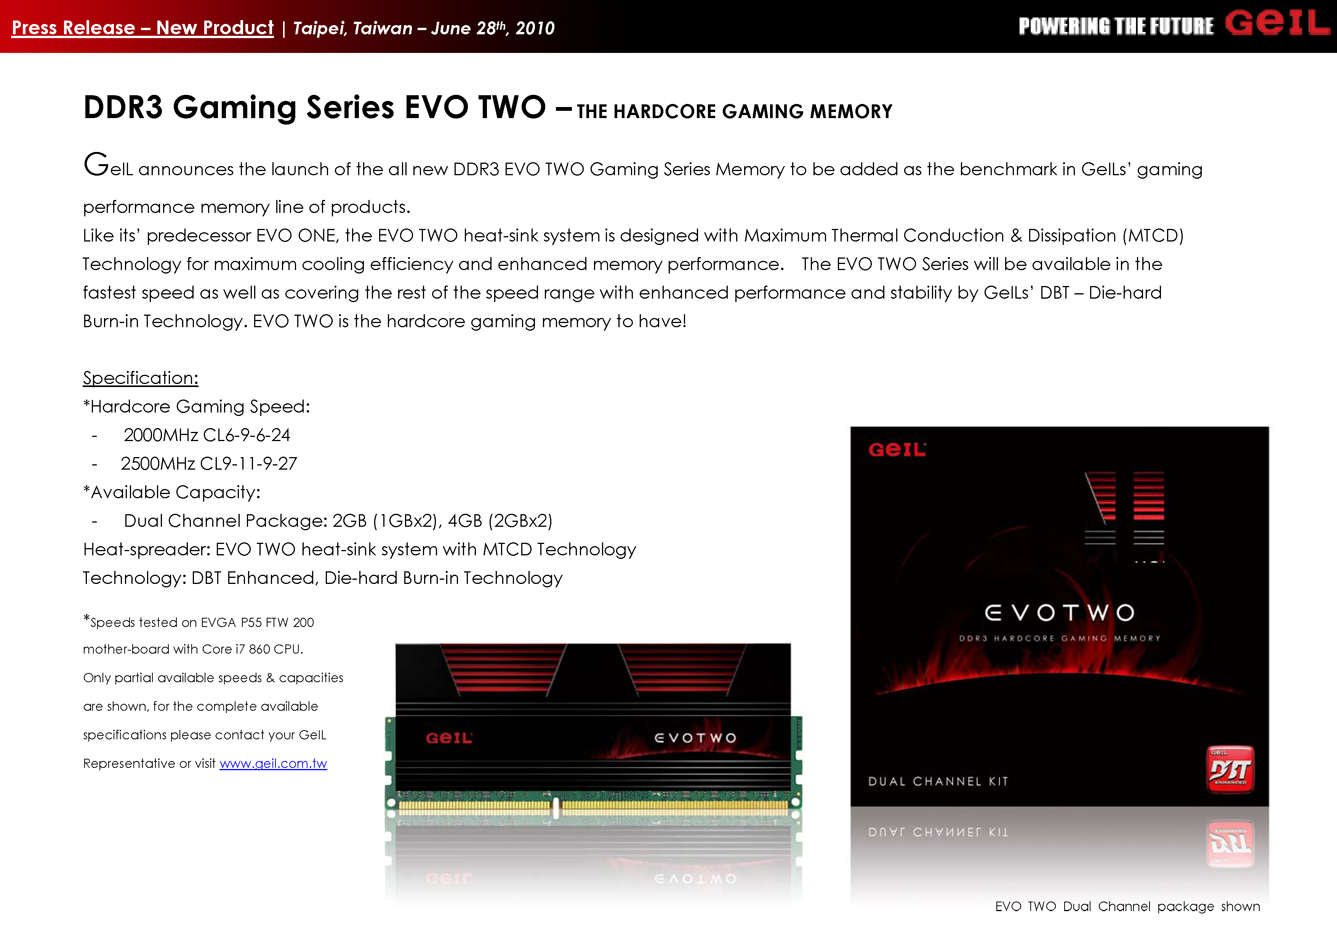 Media asset in full size related to 3dfxzone.it news item entitled as follows: GeIL annuncia le nuove DDR3 della gamma EVO TWO Gaming | Image Name: news13421_2.jpg